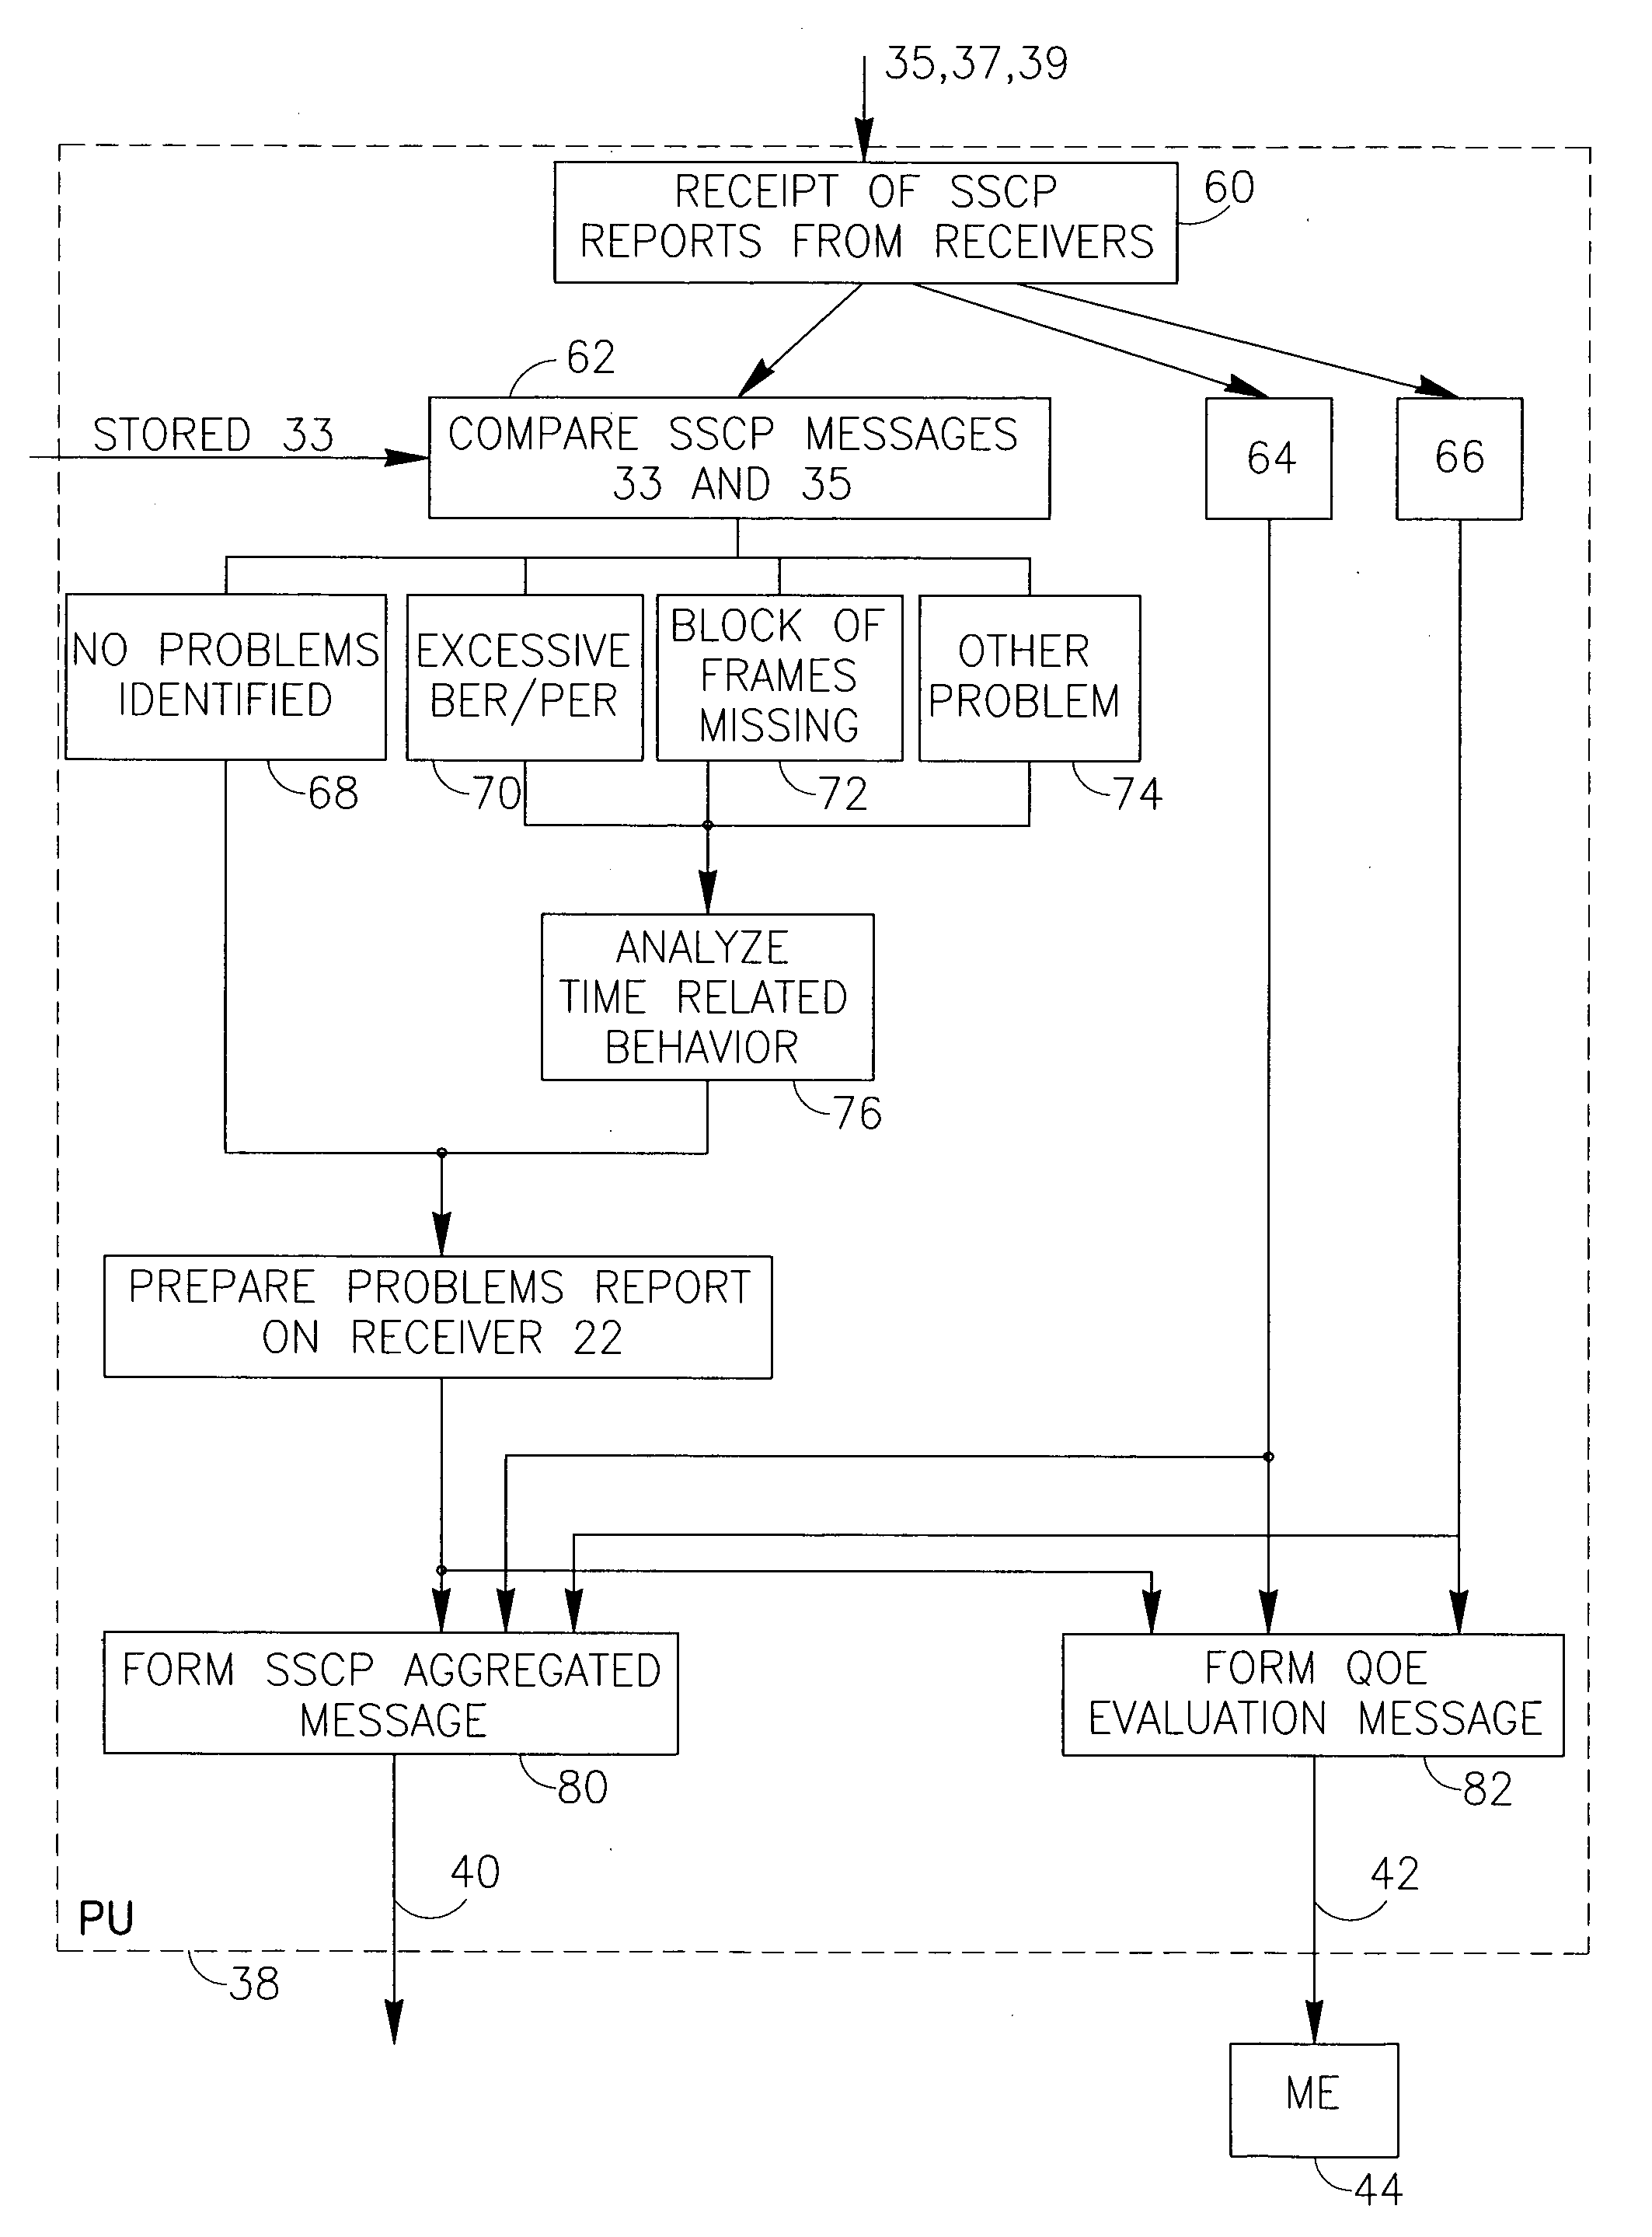 Method for monitoring access networks